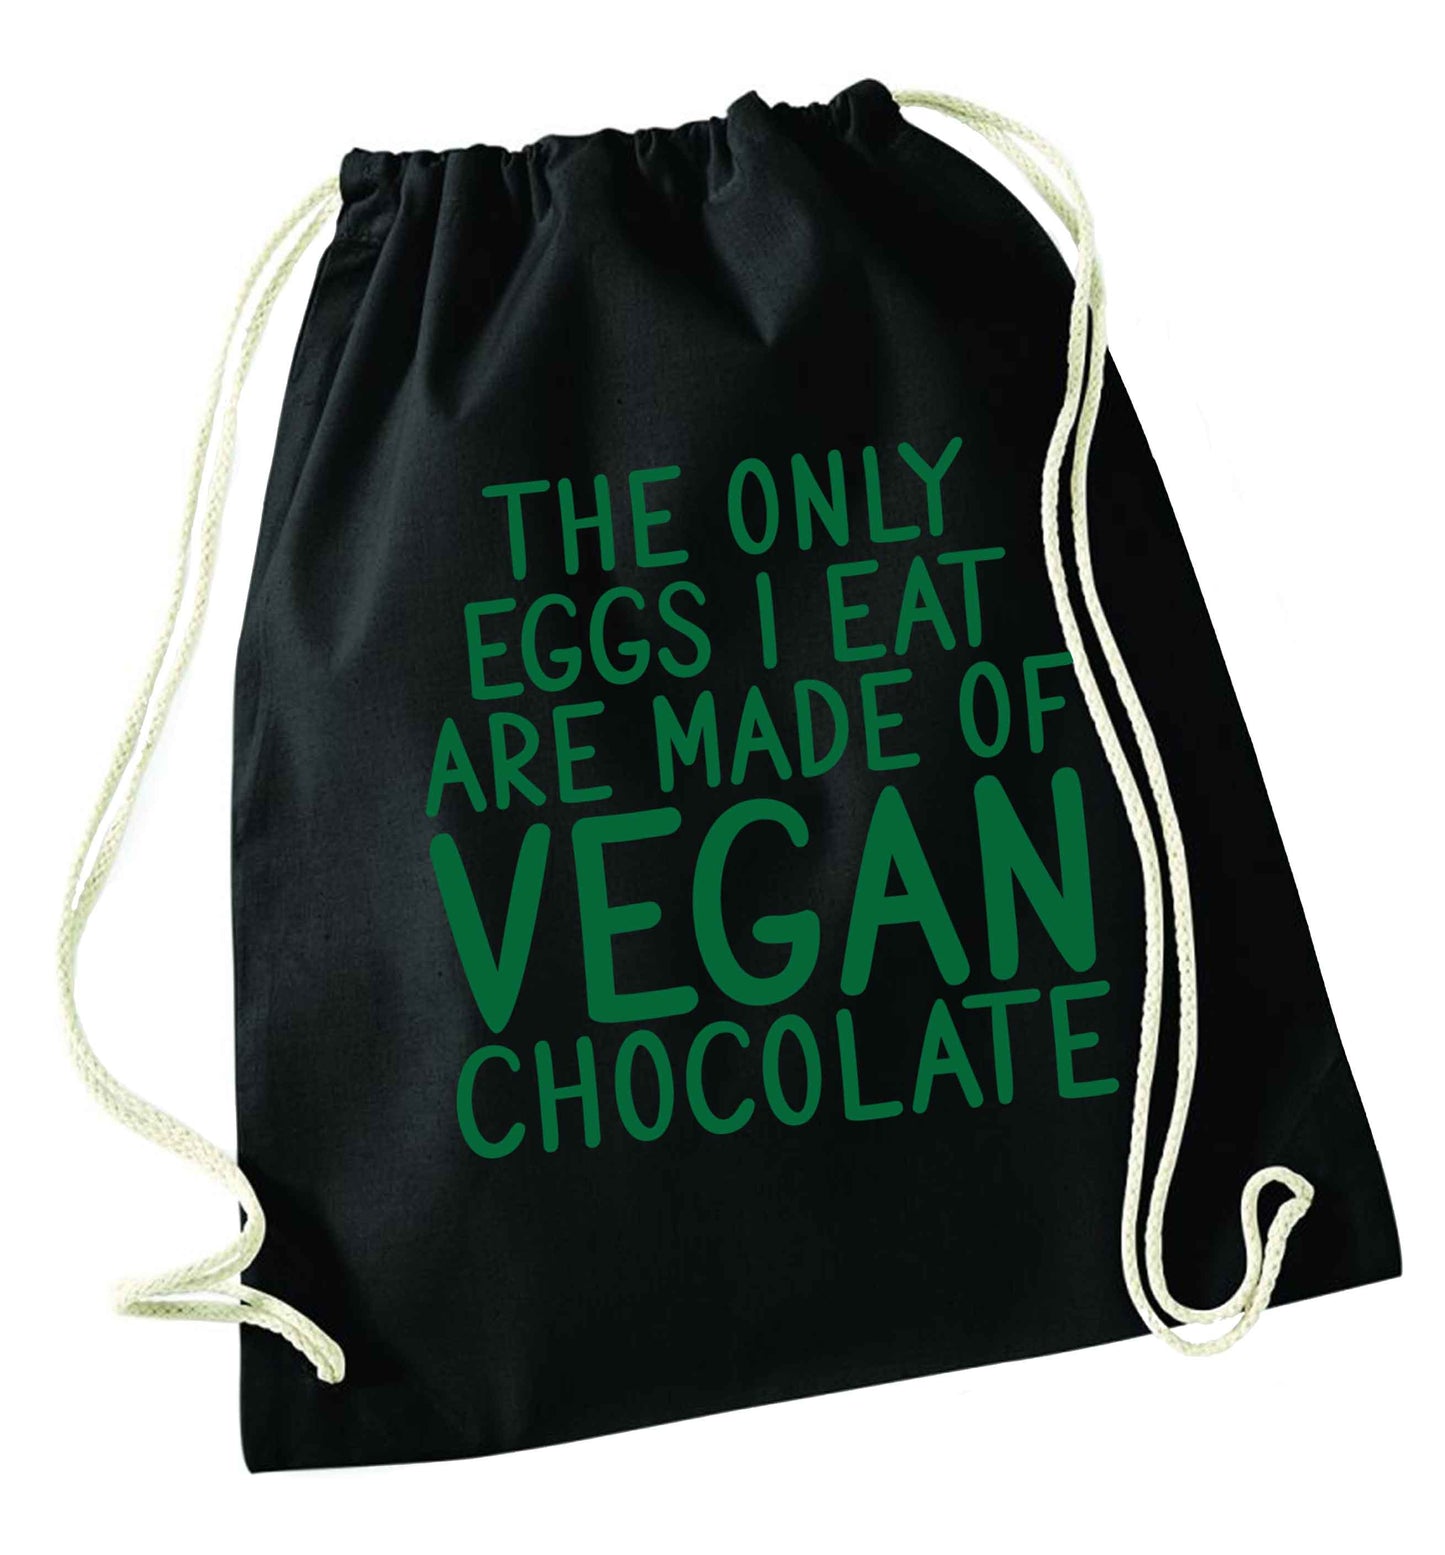 The only eggs I eat are made of vegan chocolate black drawstring bag